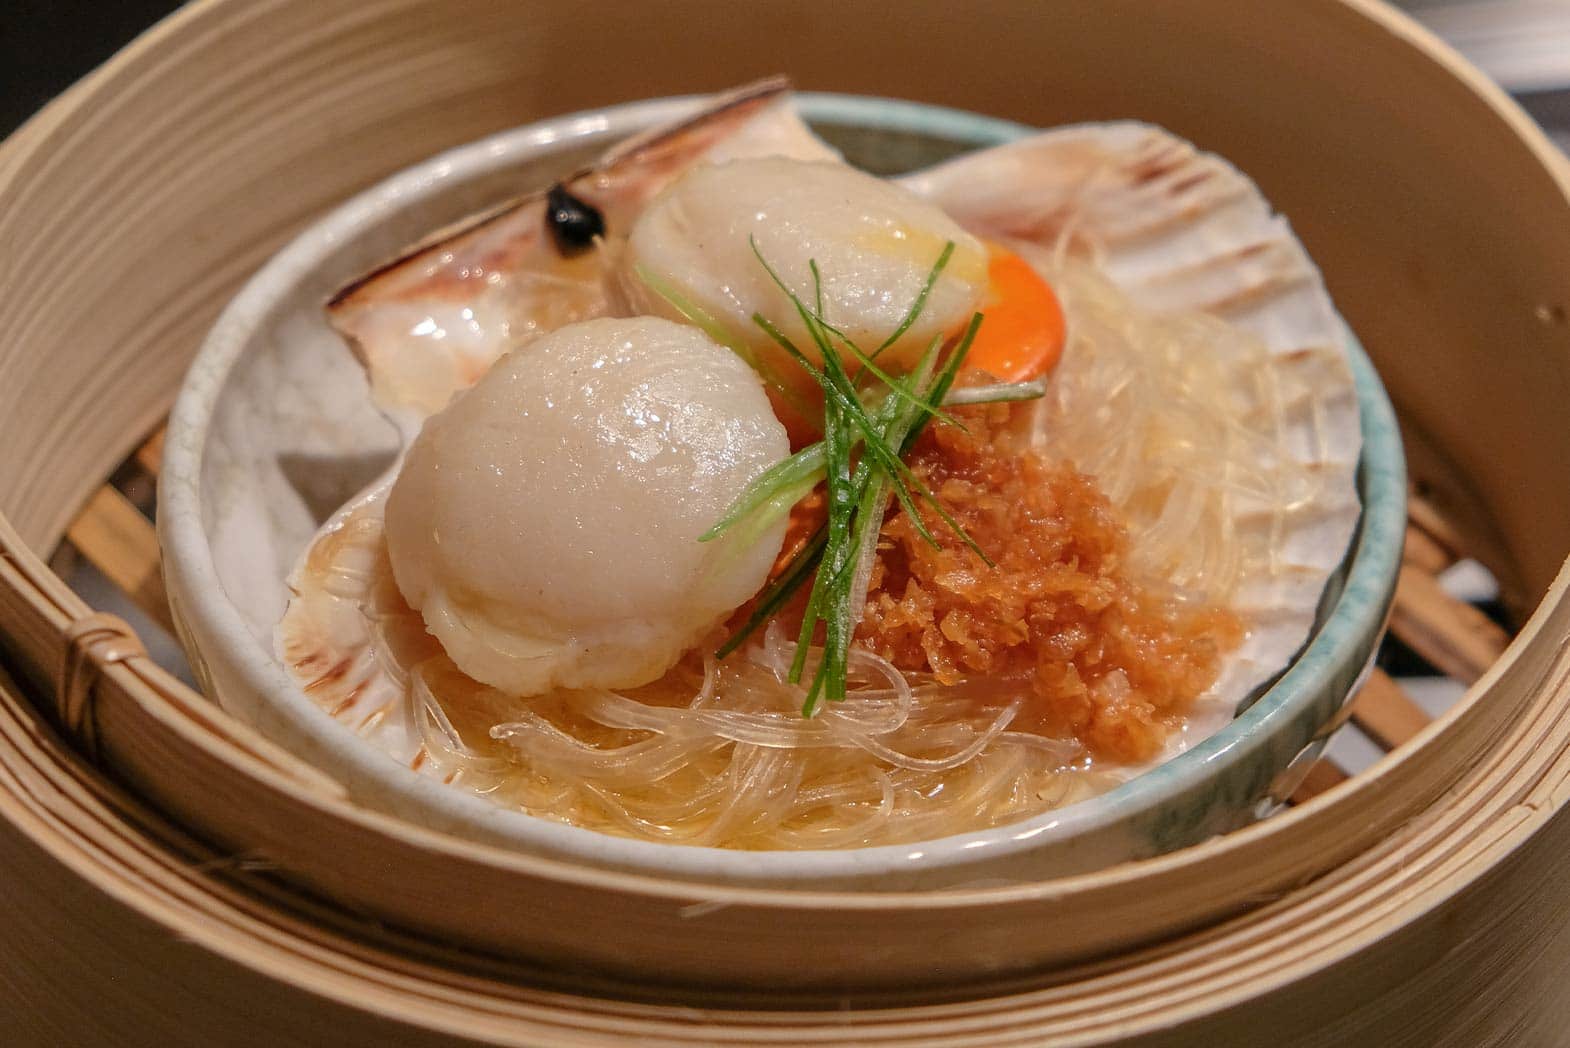 Steamed scallops with glass noodles and fried garlic